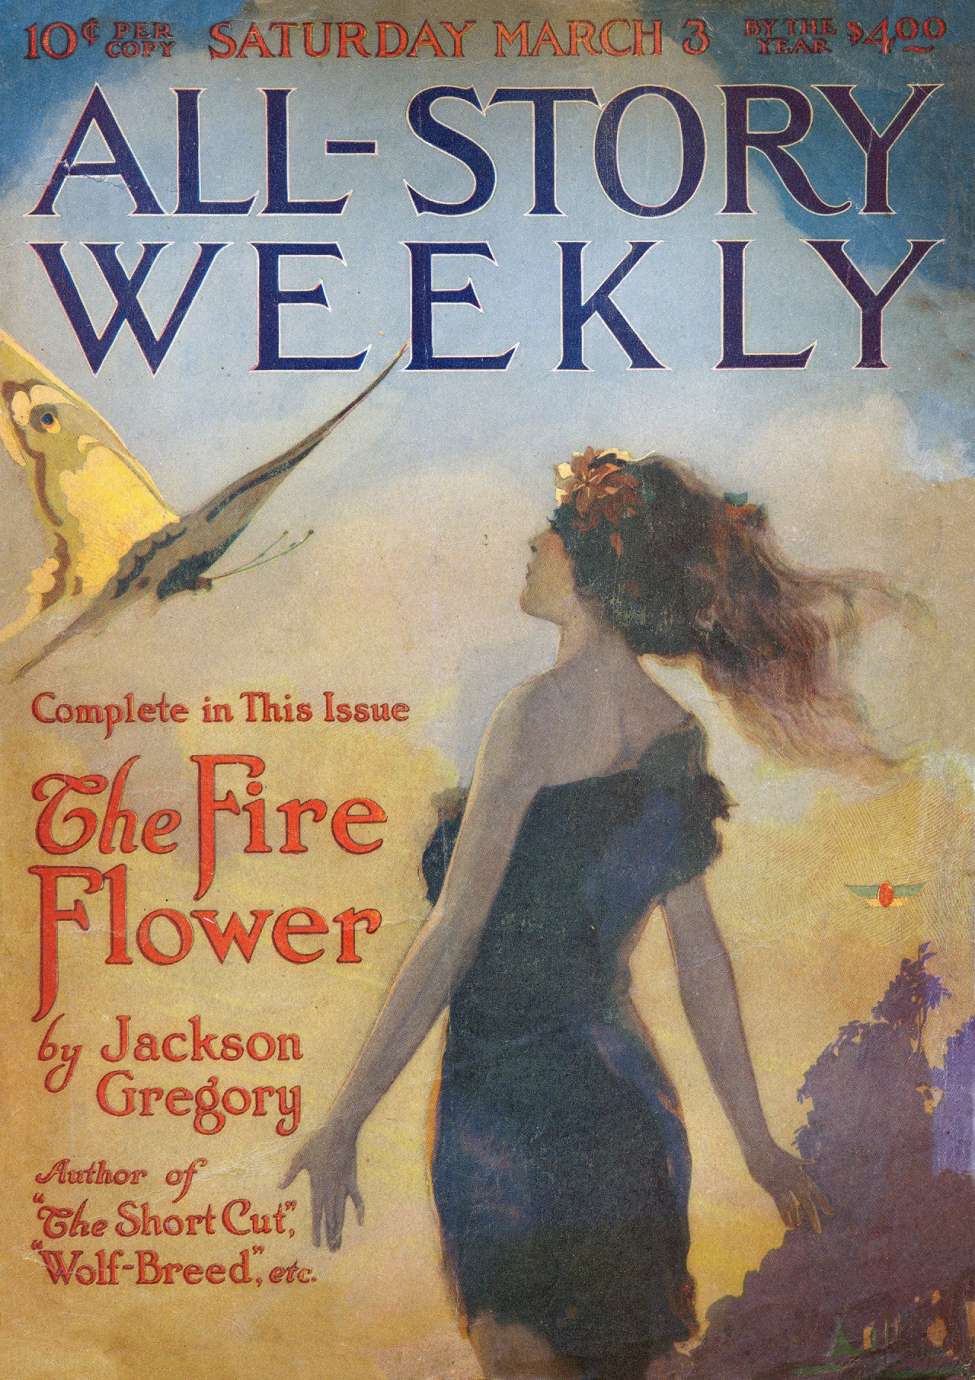 Book Cover For All-Story Weekly v68 3